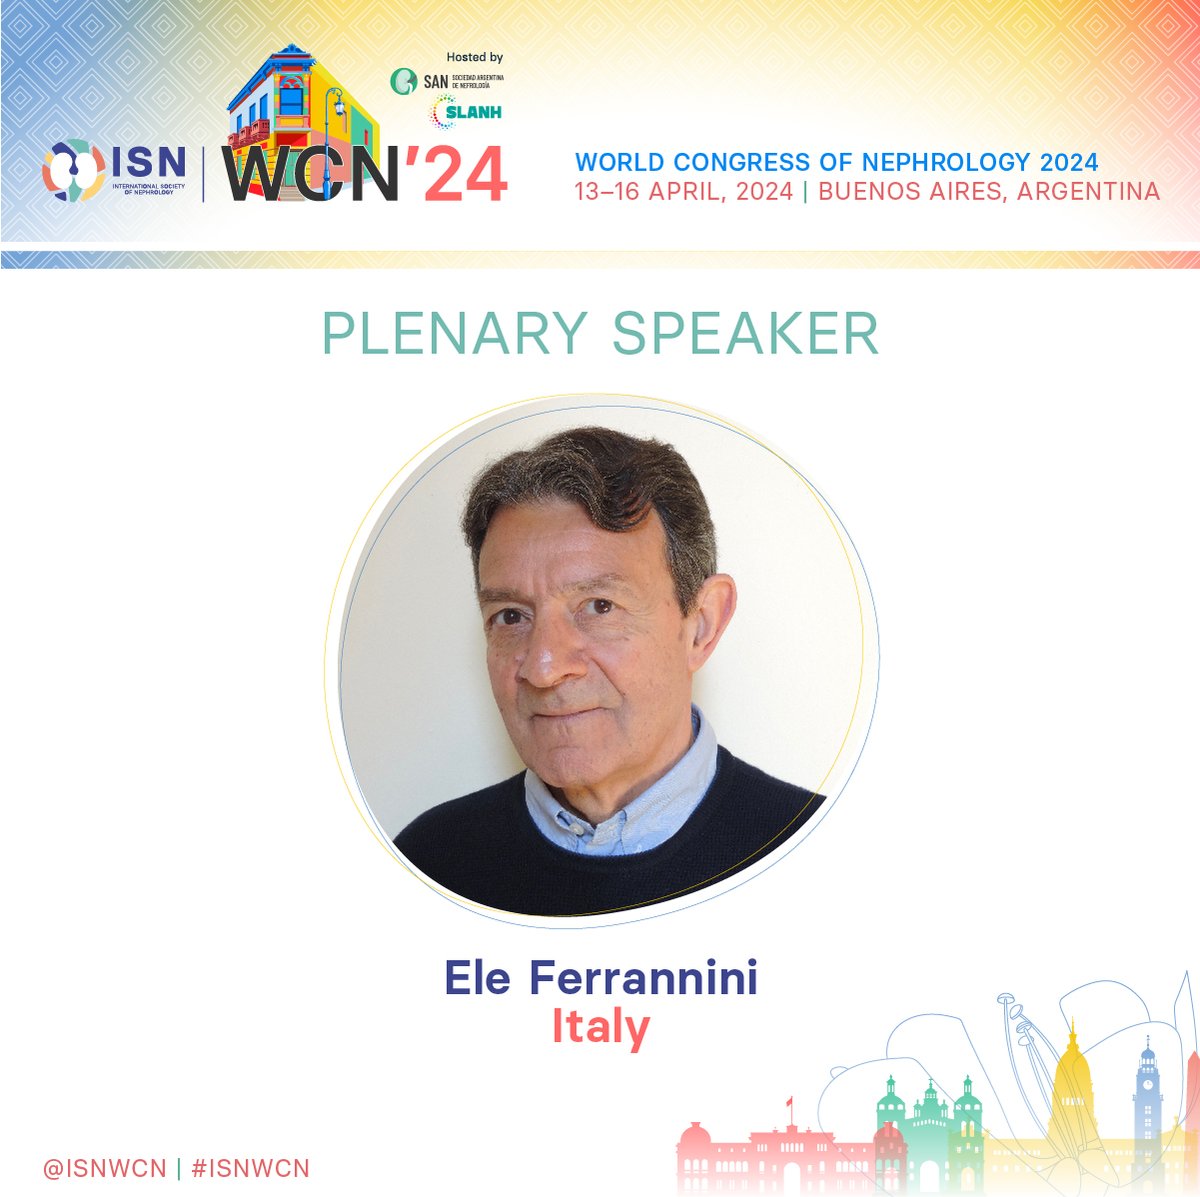 Beyond blood sugar: Ele Ferrannini on the basis for the transformative power of #SGLT2i for kidney disease management at WCN’24 ow.ly/UW3Q50QhSfn Find out more about WCN’s plenary speakers and scientific program: ow.ly/PTPF50QhSfo Register for the #ISNWCN now to…